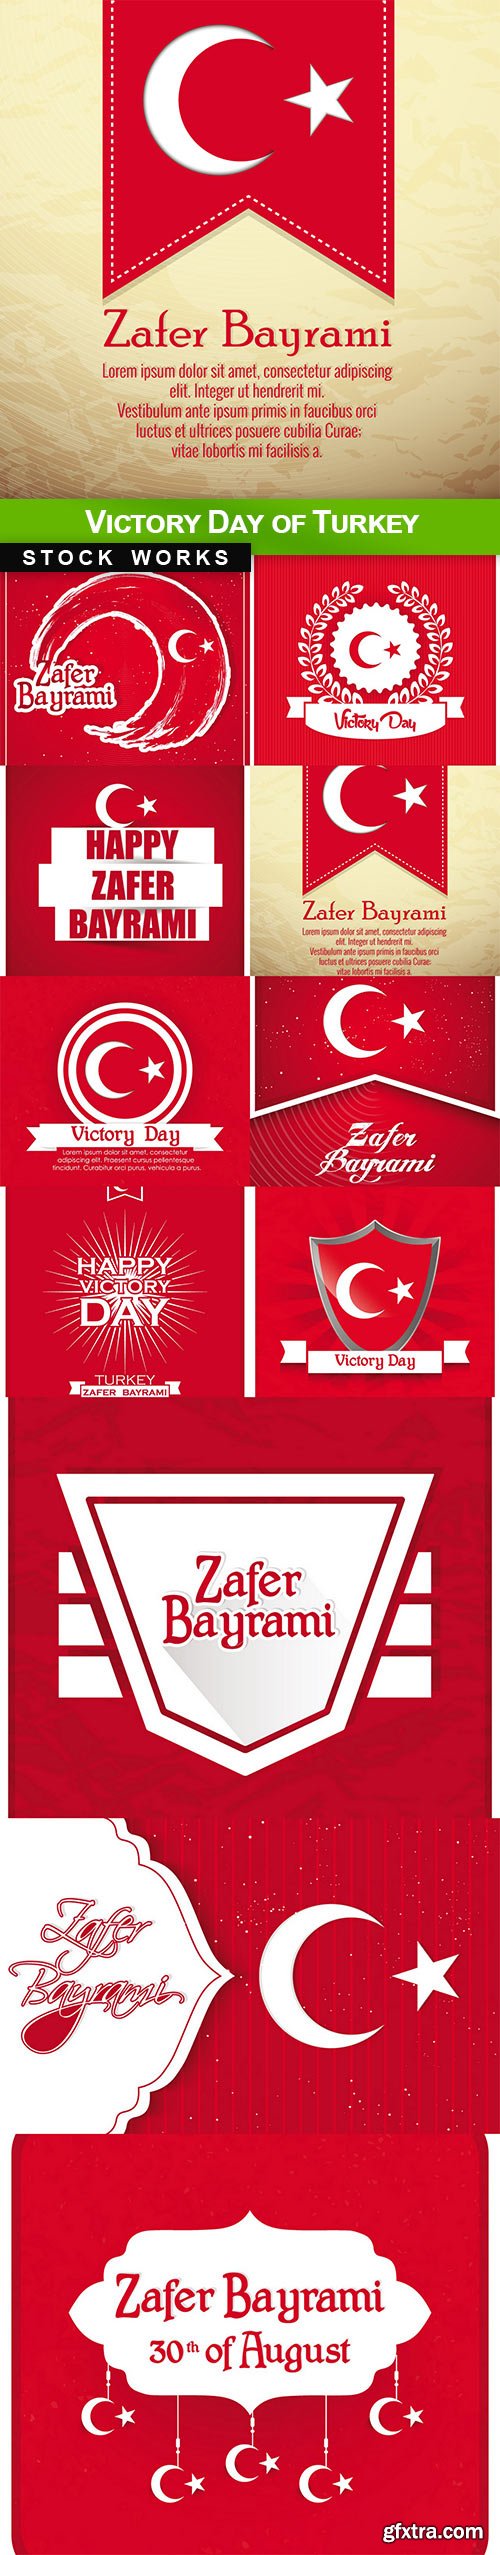 Victory Day of Turkey - 11 EPS